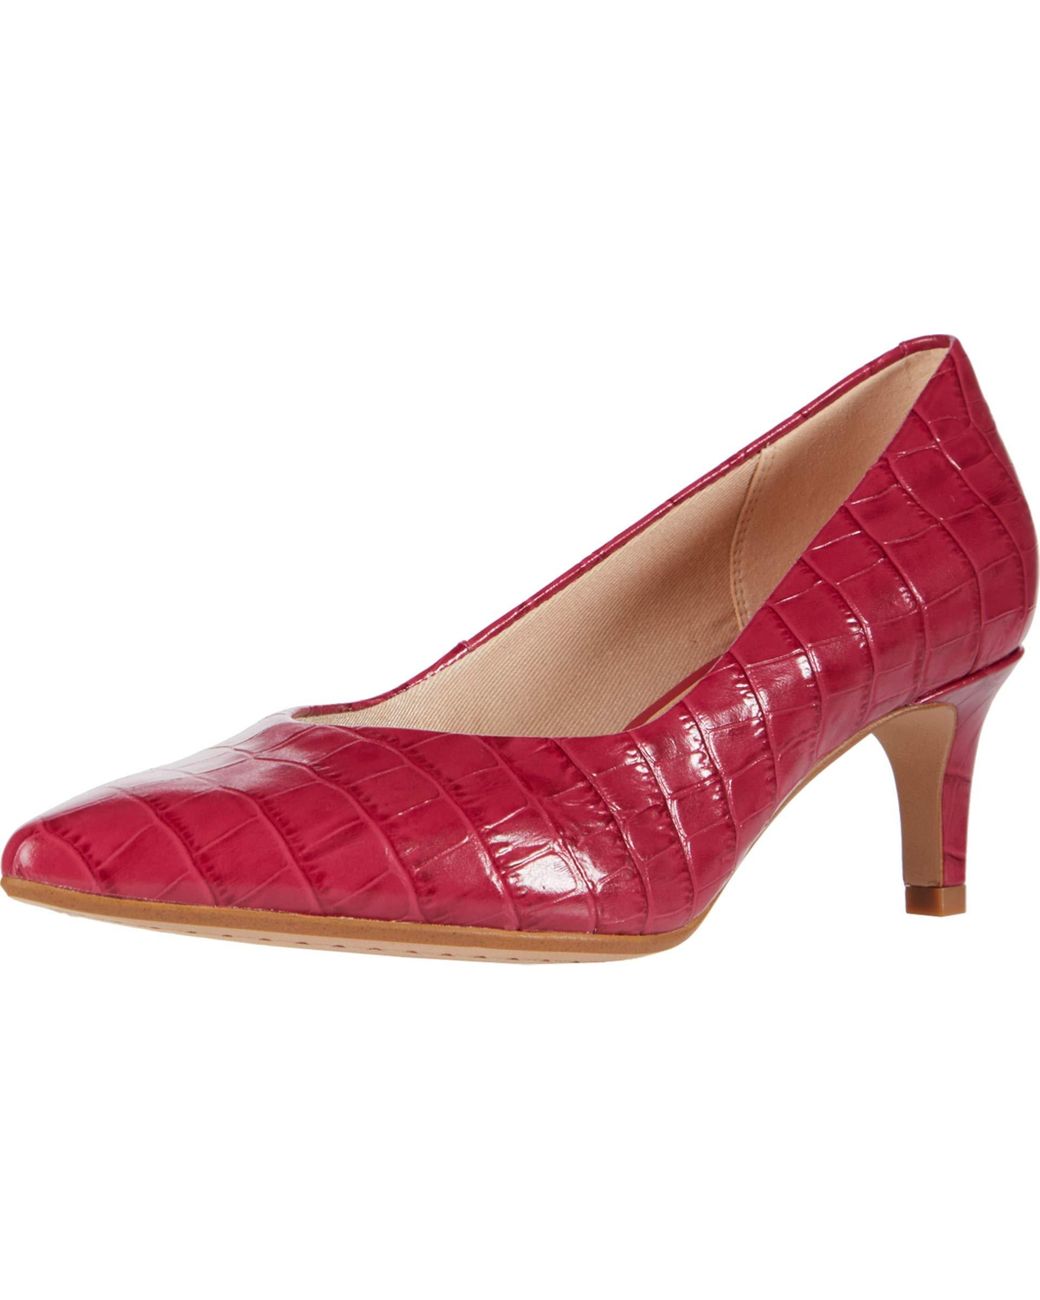 clarks pink court shoes